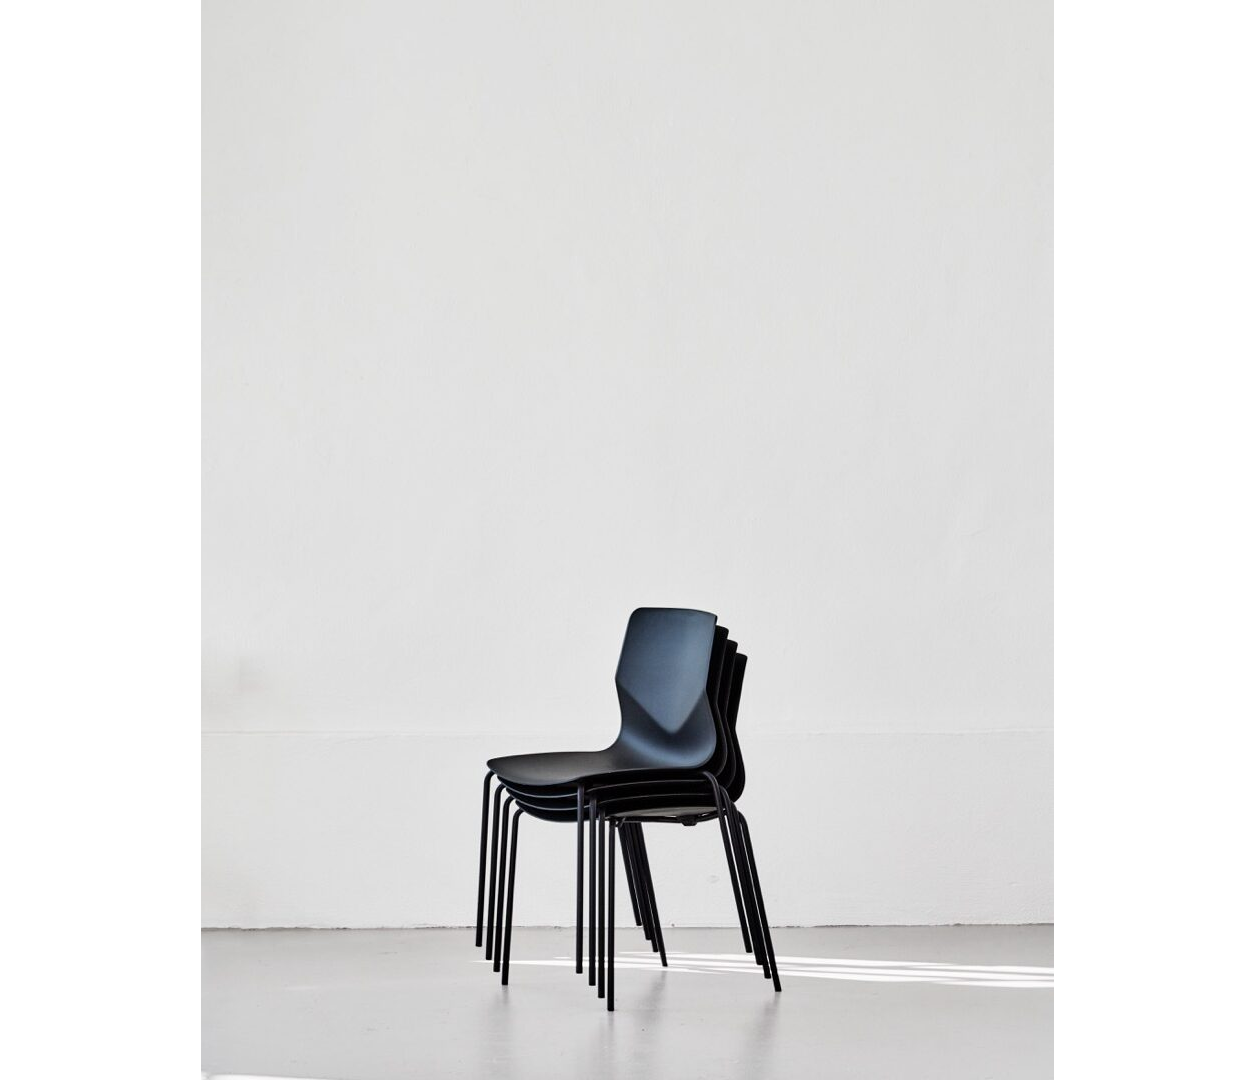 OCEE&FOUR – Chairs – FourSure 44 – EU Ecolabel - Lifestyle Image 4 Large